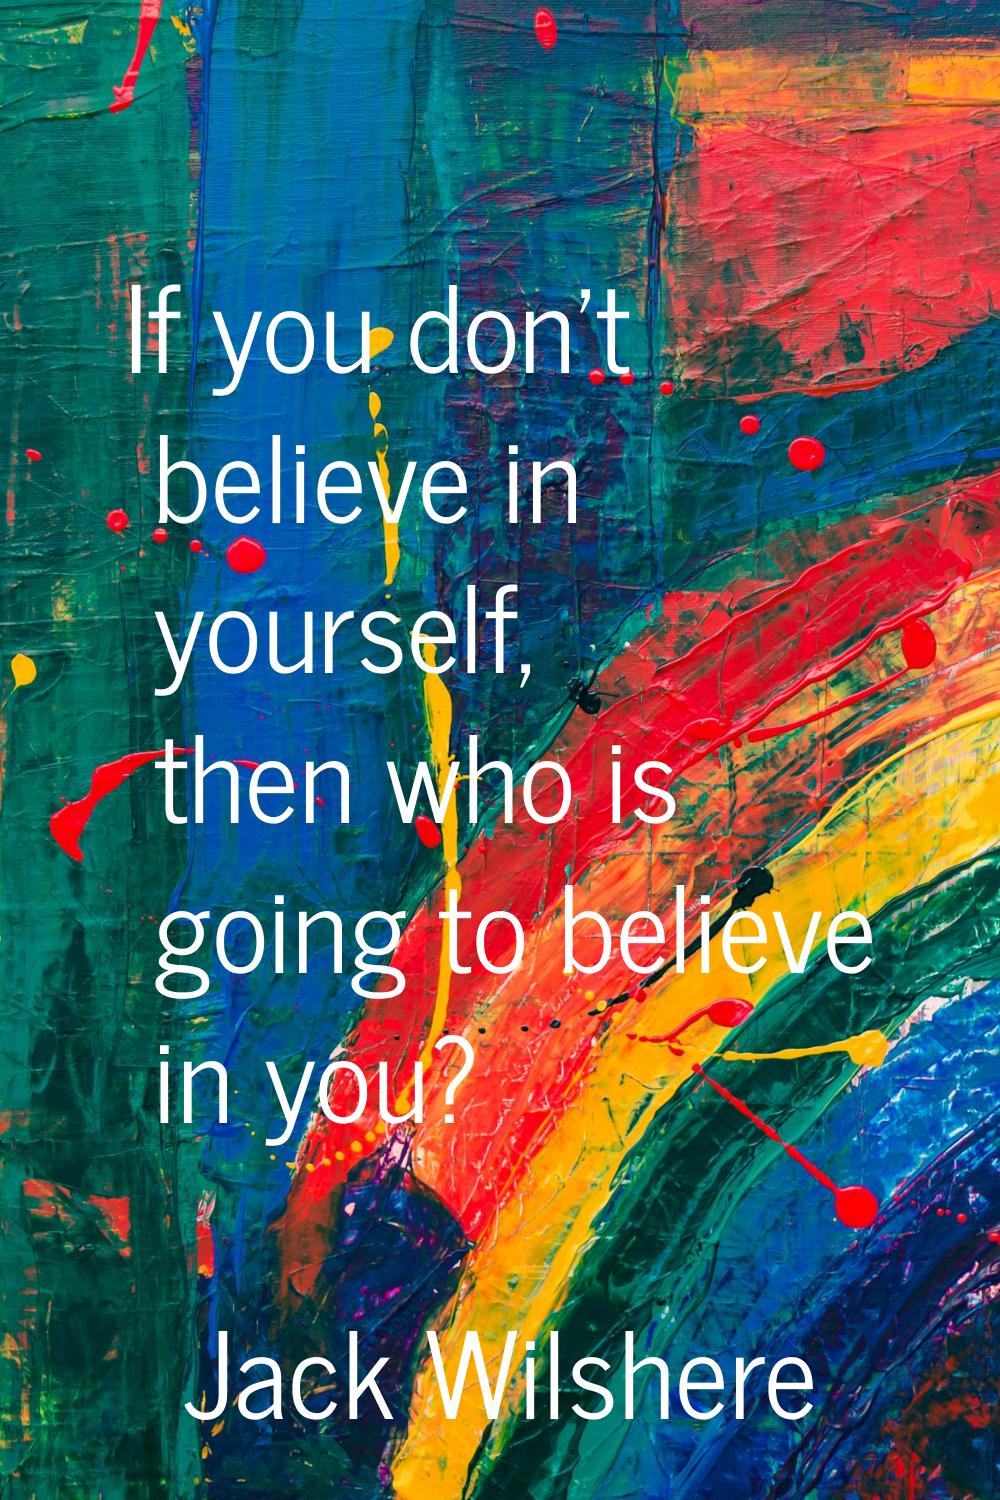 If you don't believe in yourself, then who is going to believe in you?